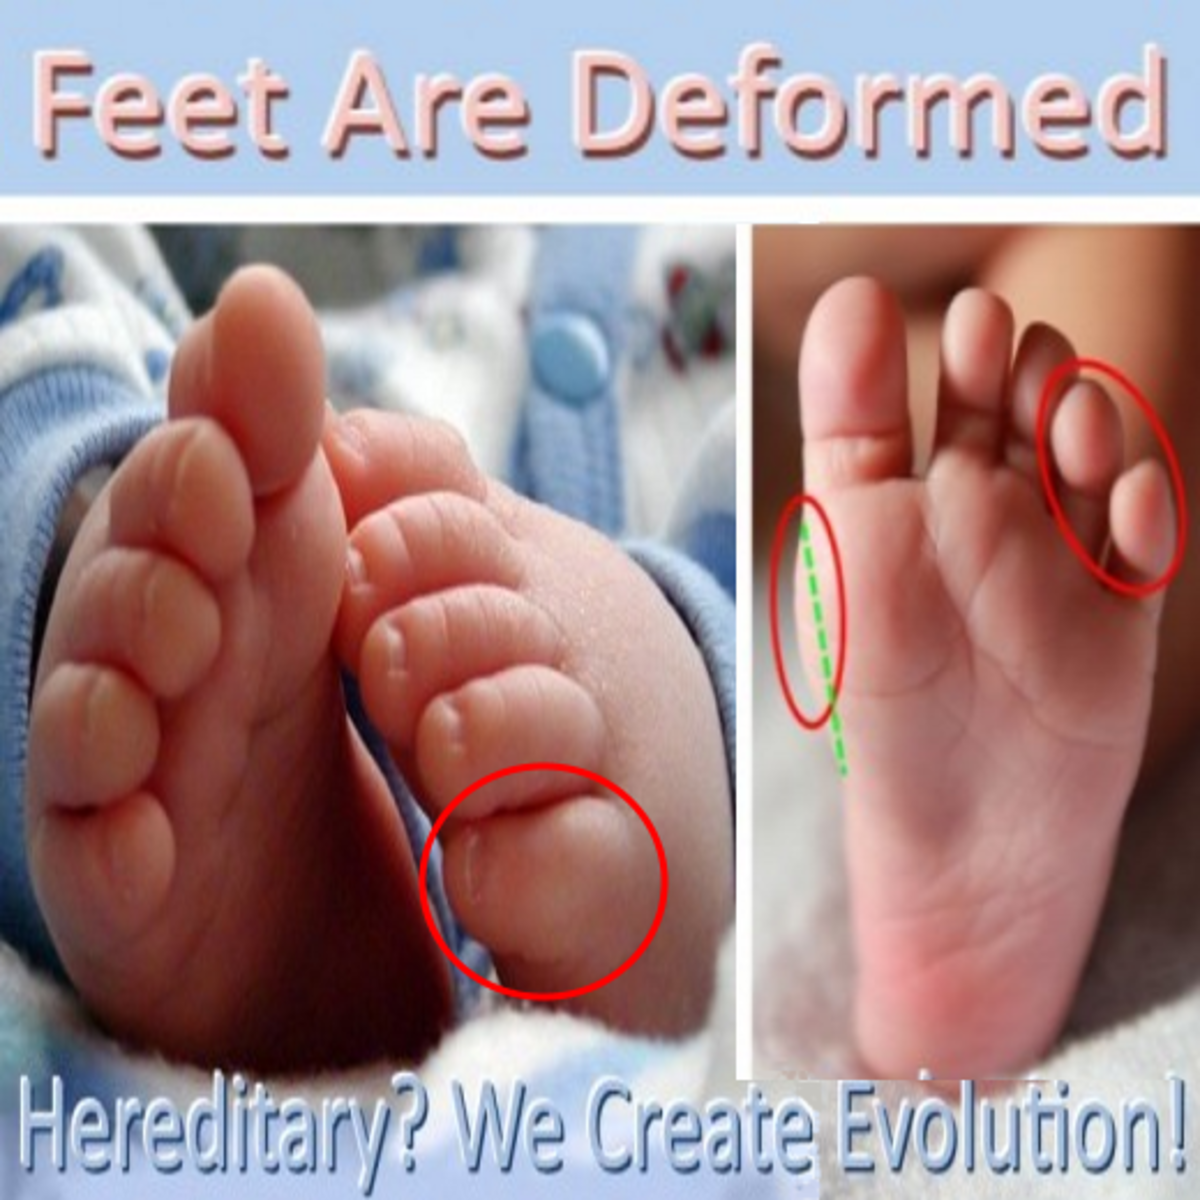 With generations wearing shoes that are not made for the anatomy of a human foot, even babies are born with deformed feet.